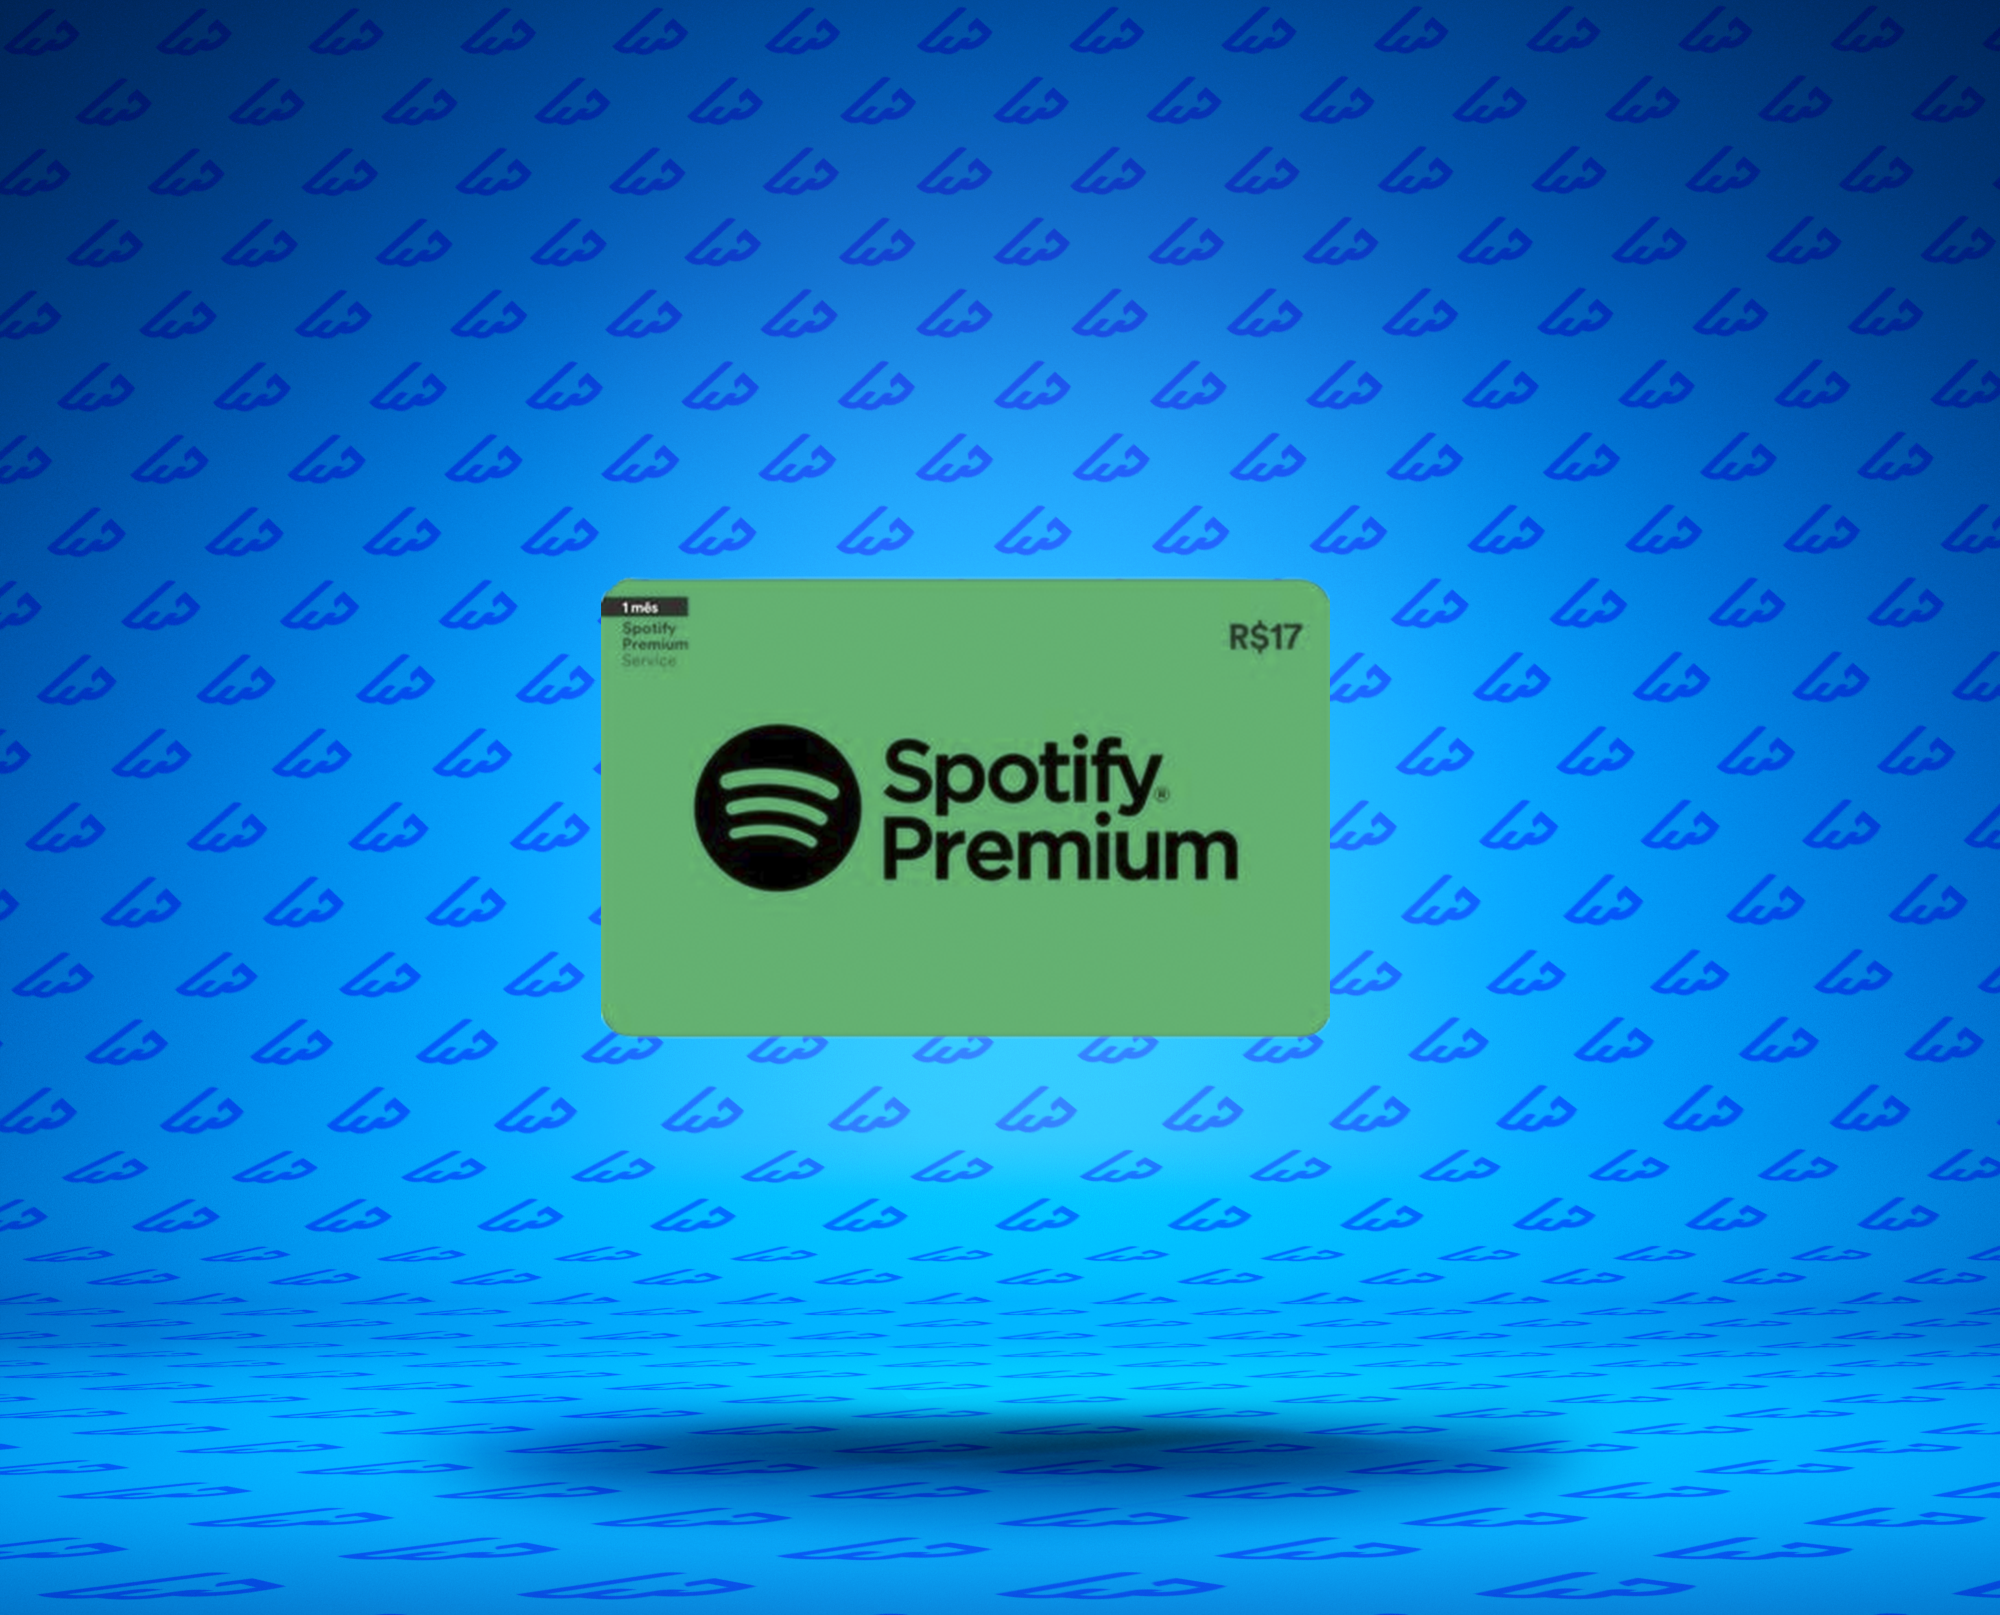 Get 3 Months of Free Spotify Premium | PayPal US